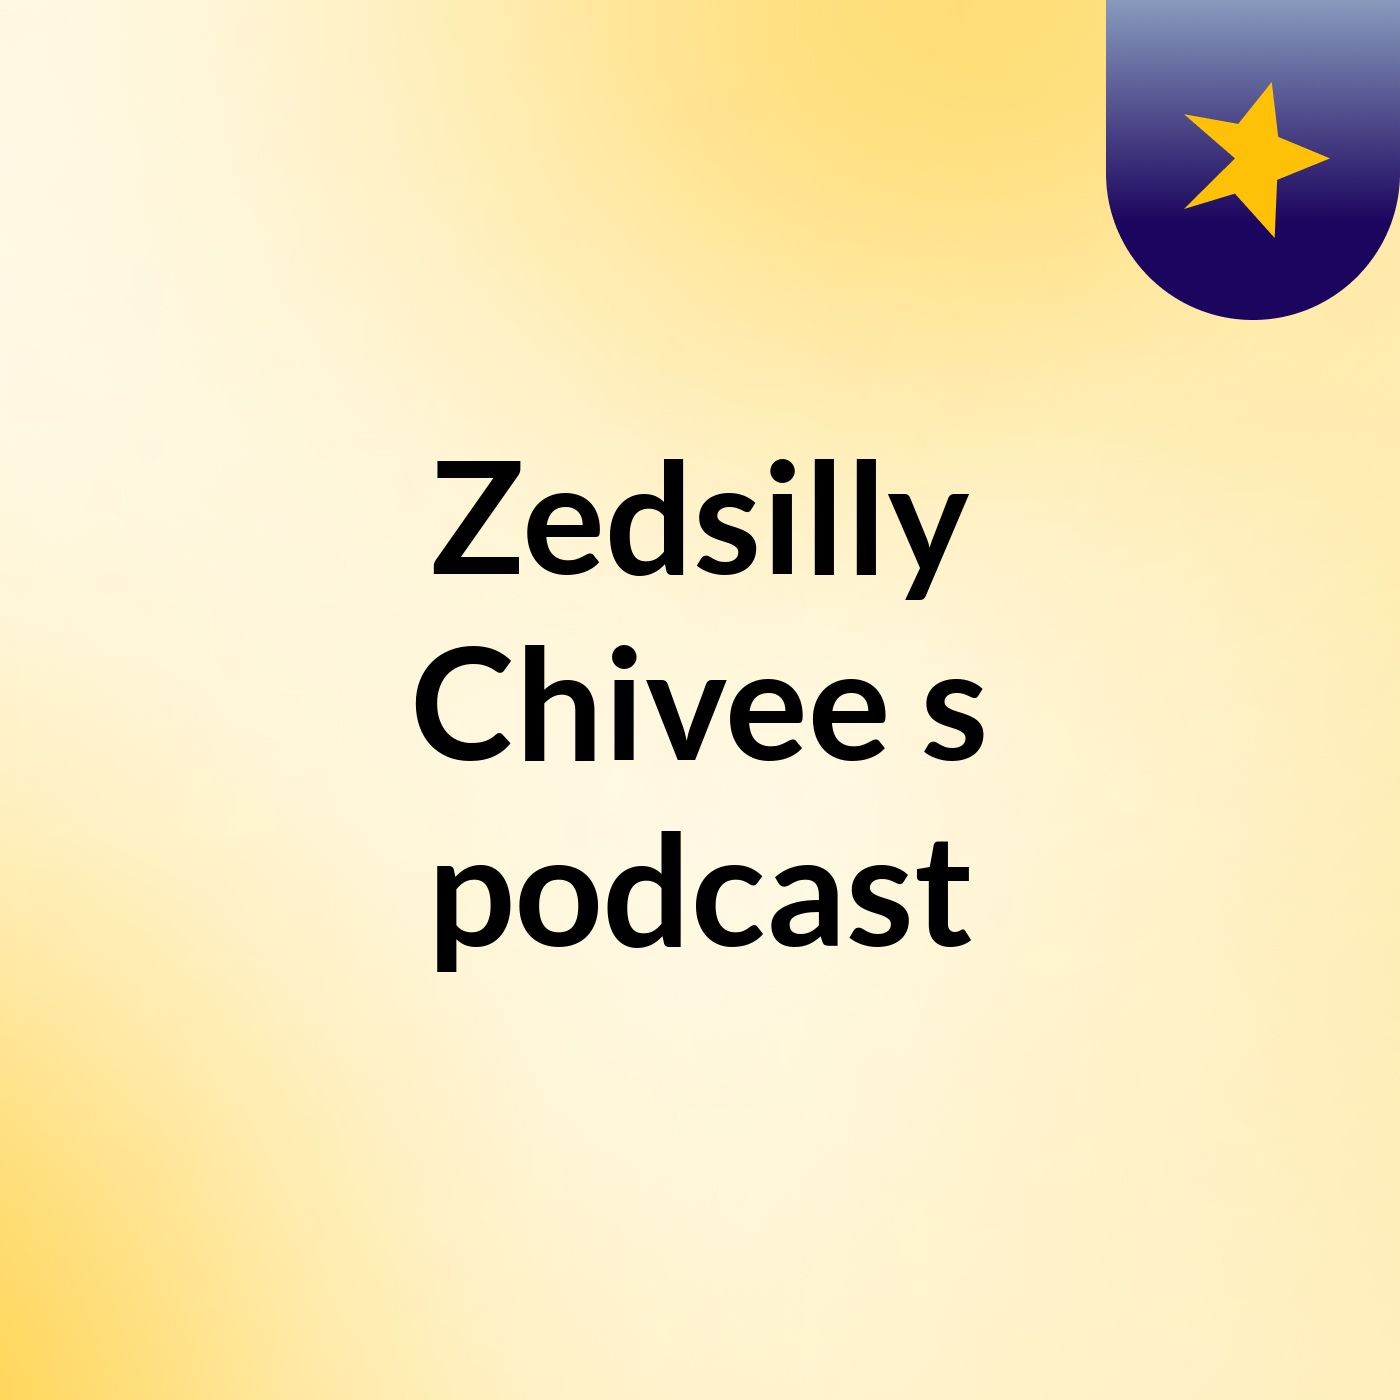 Zedsilly Chivee's podcast